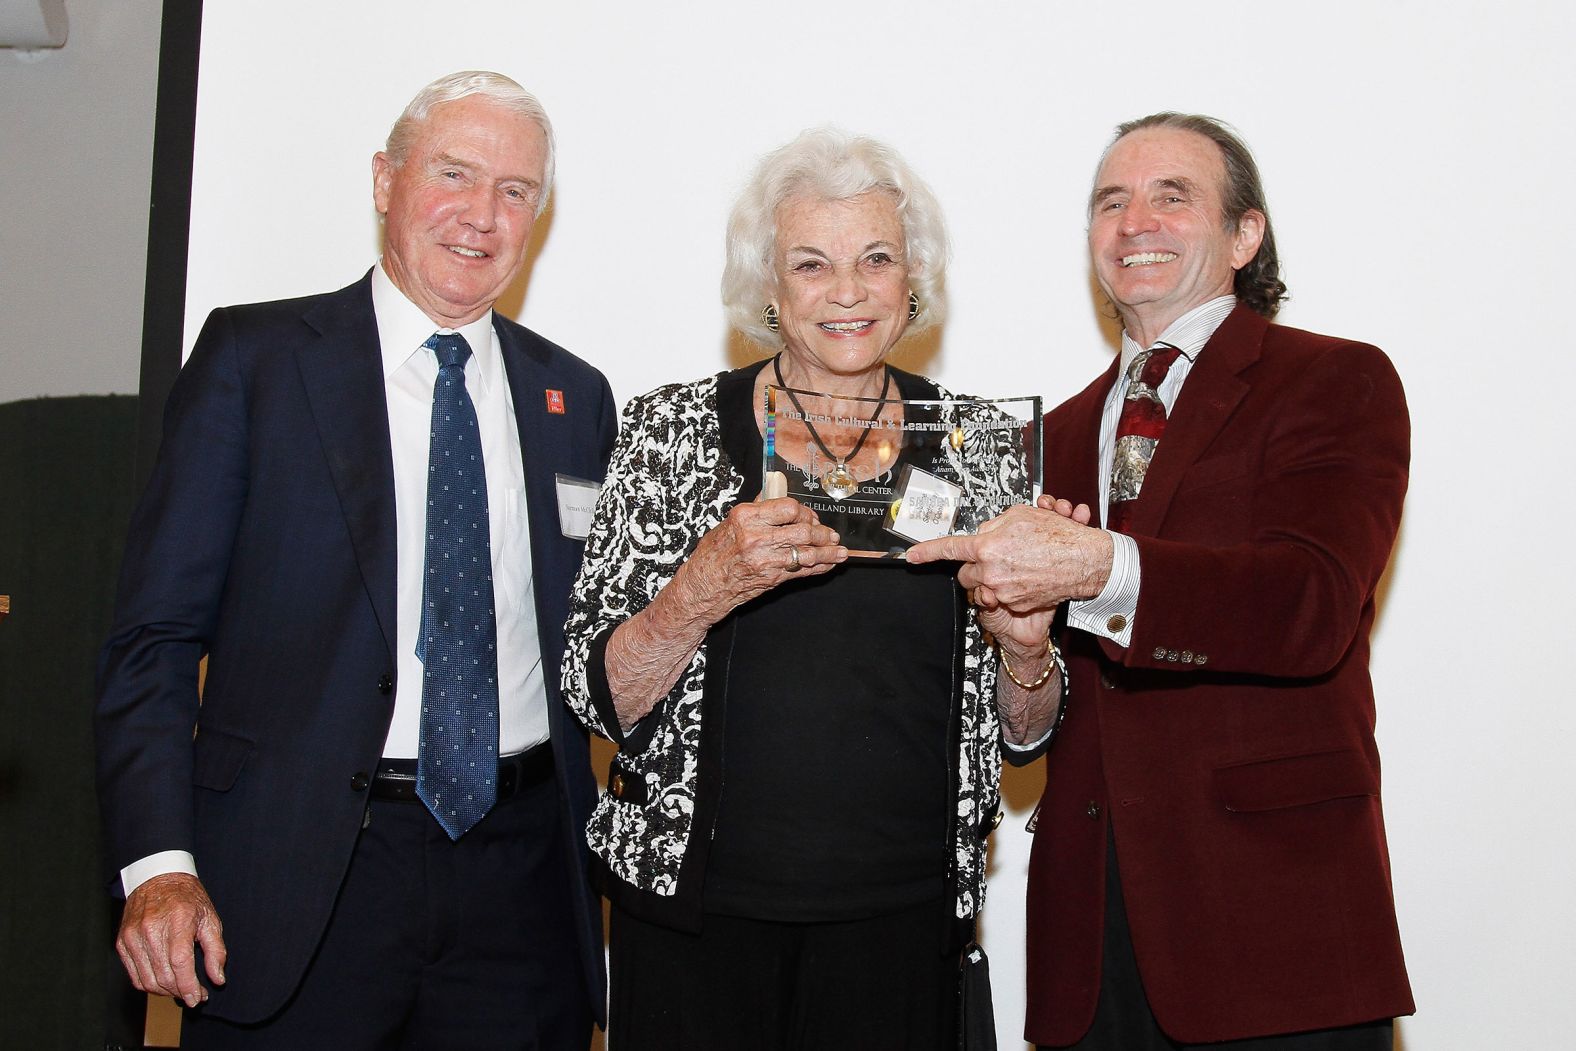 O'Connor receives the Anam Cara Award at the Irish Cultural Center in Phoenix in 2014.